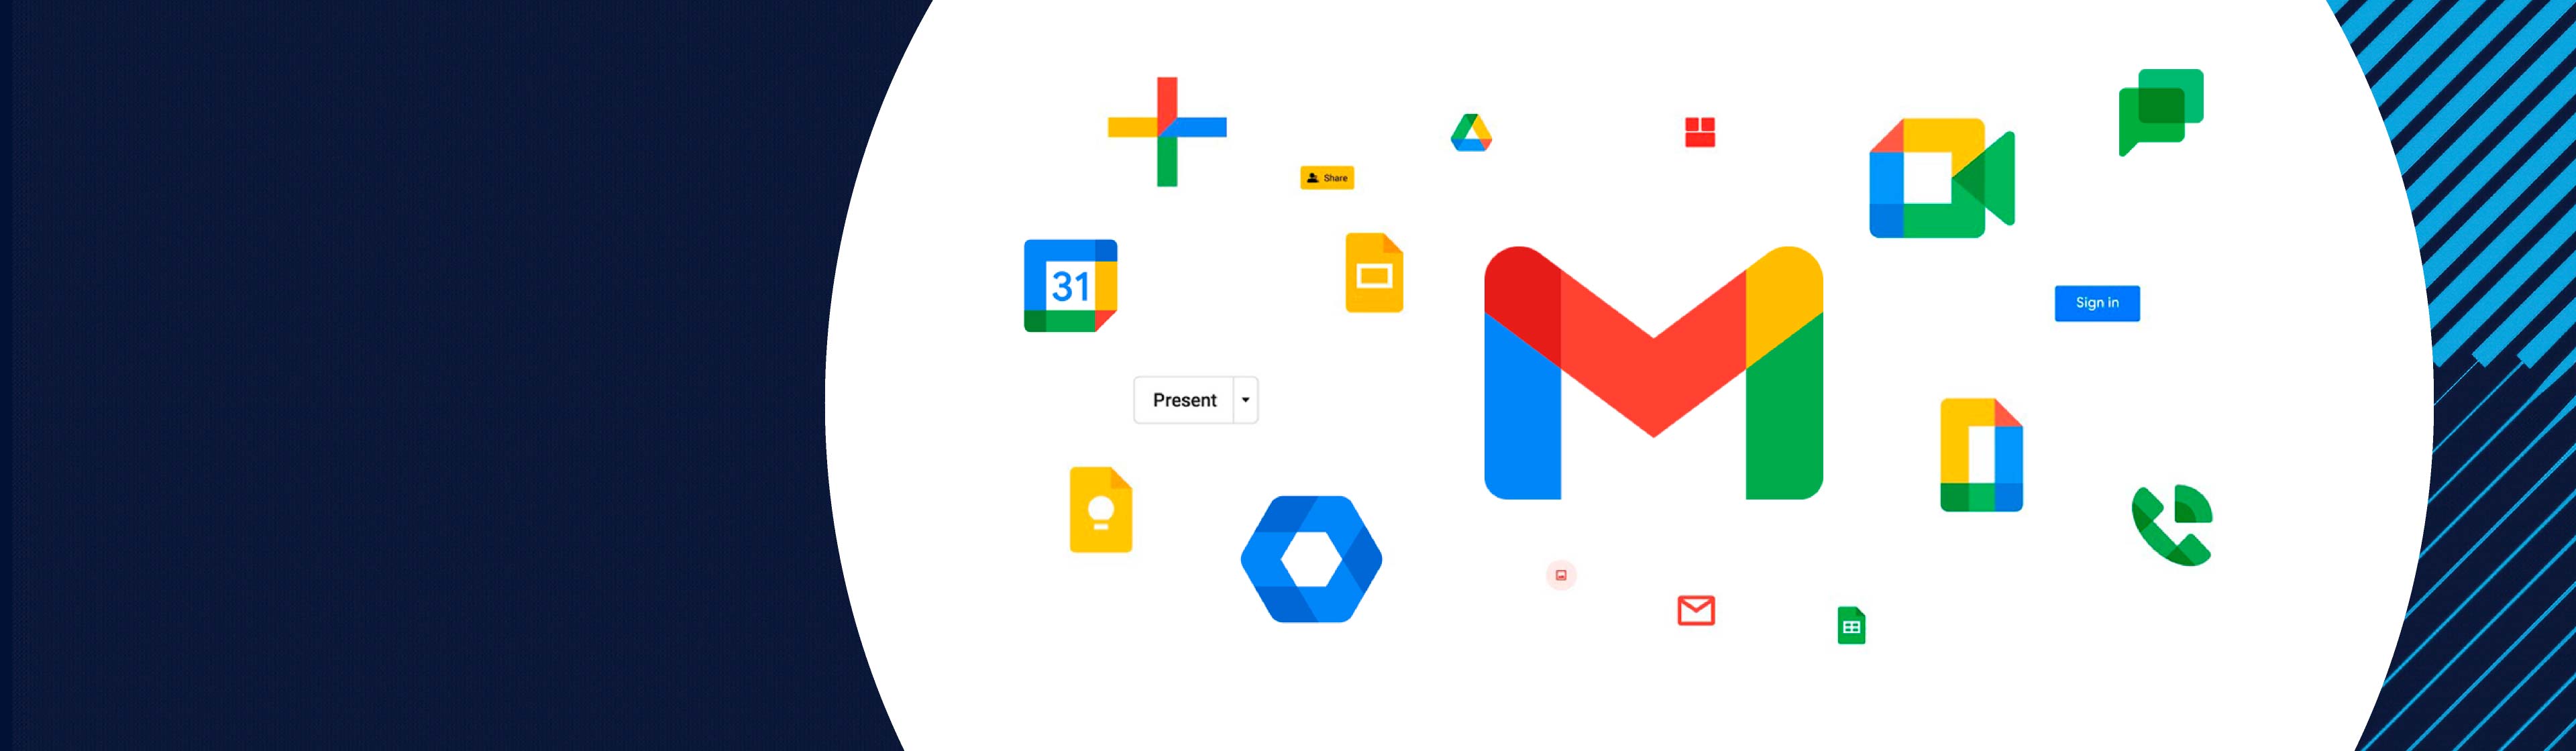 Assorted Google Workspace iconography